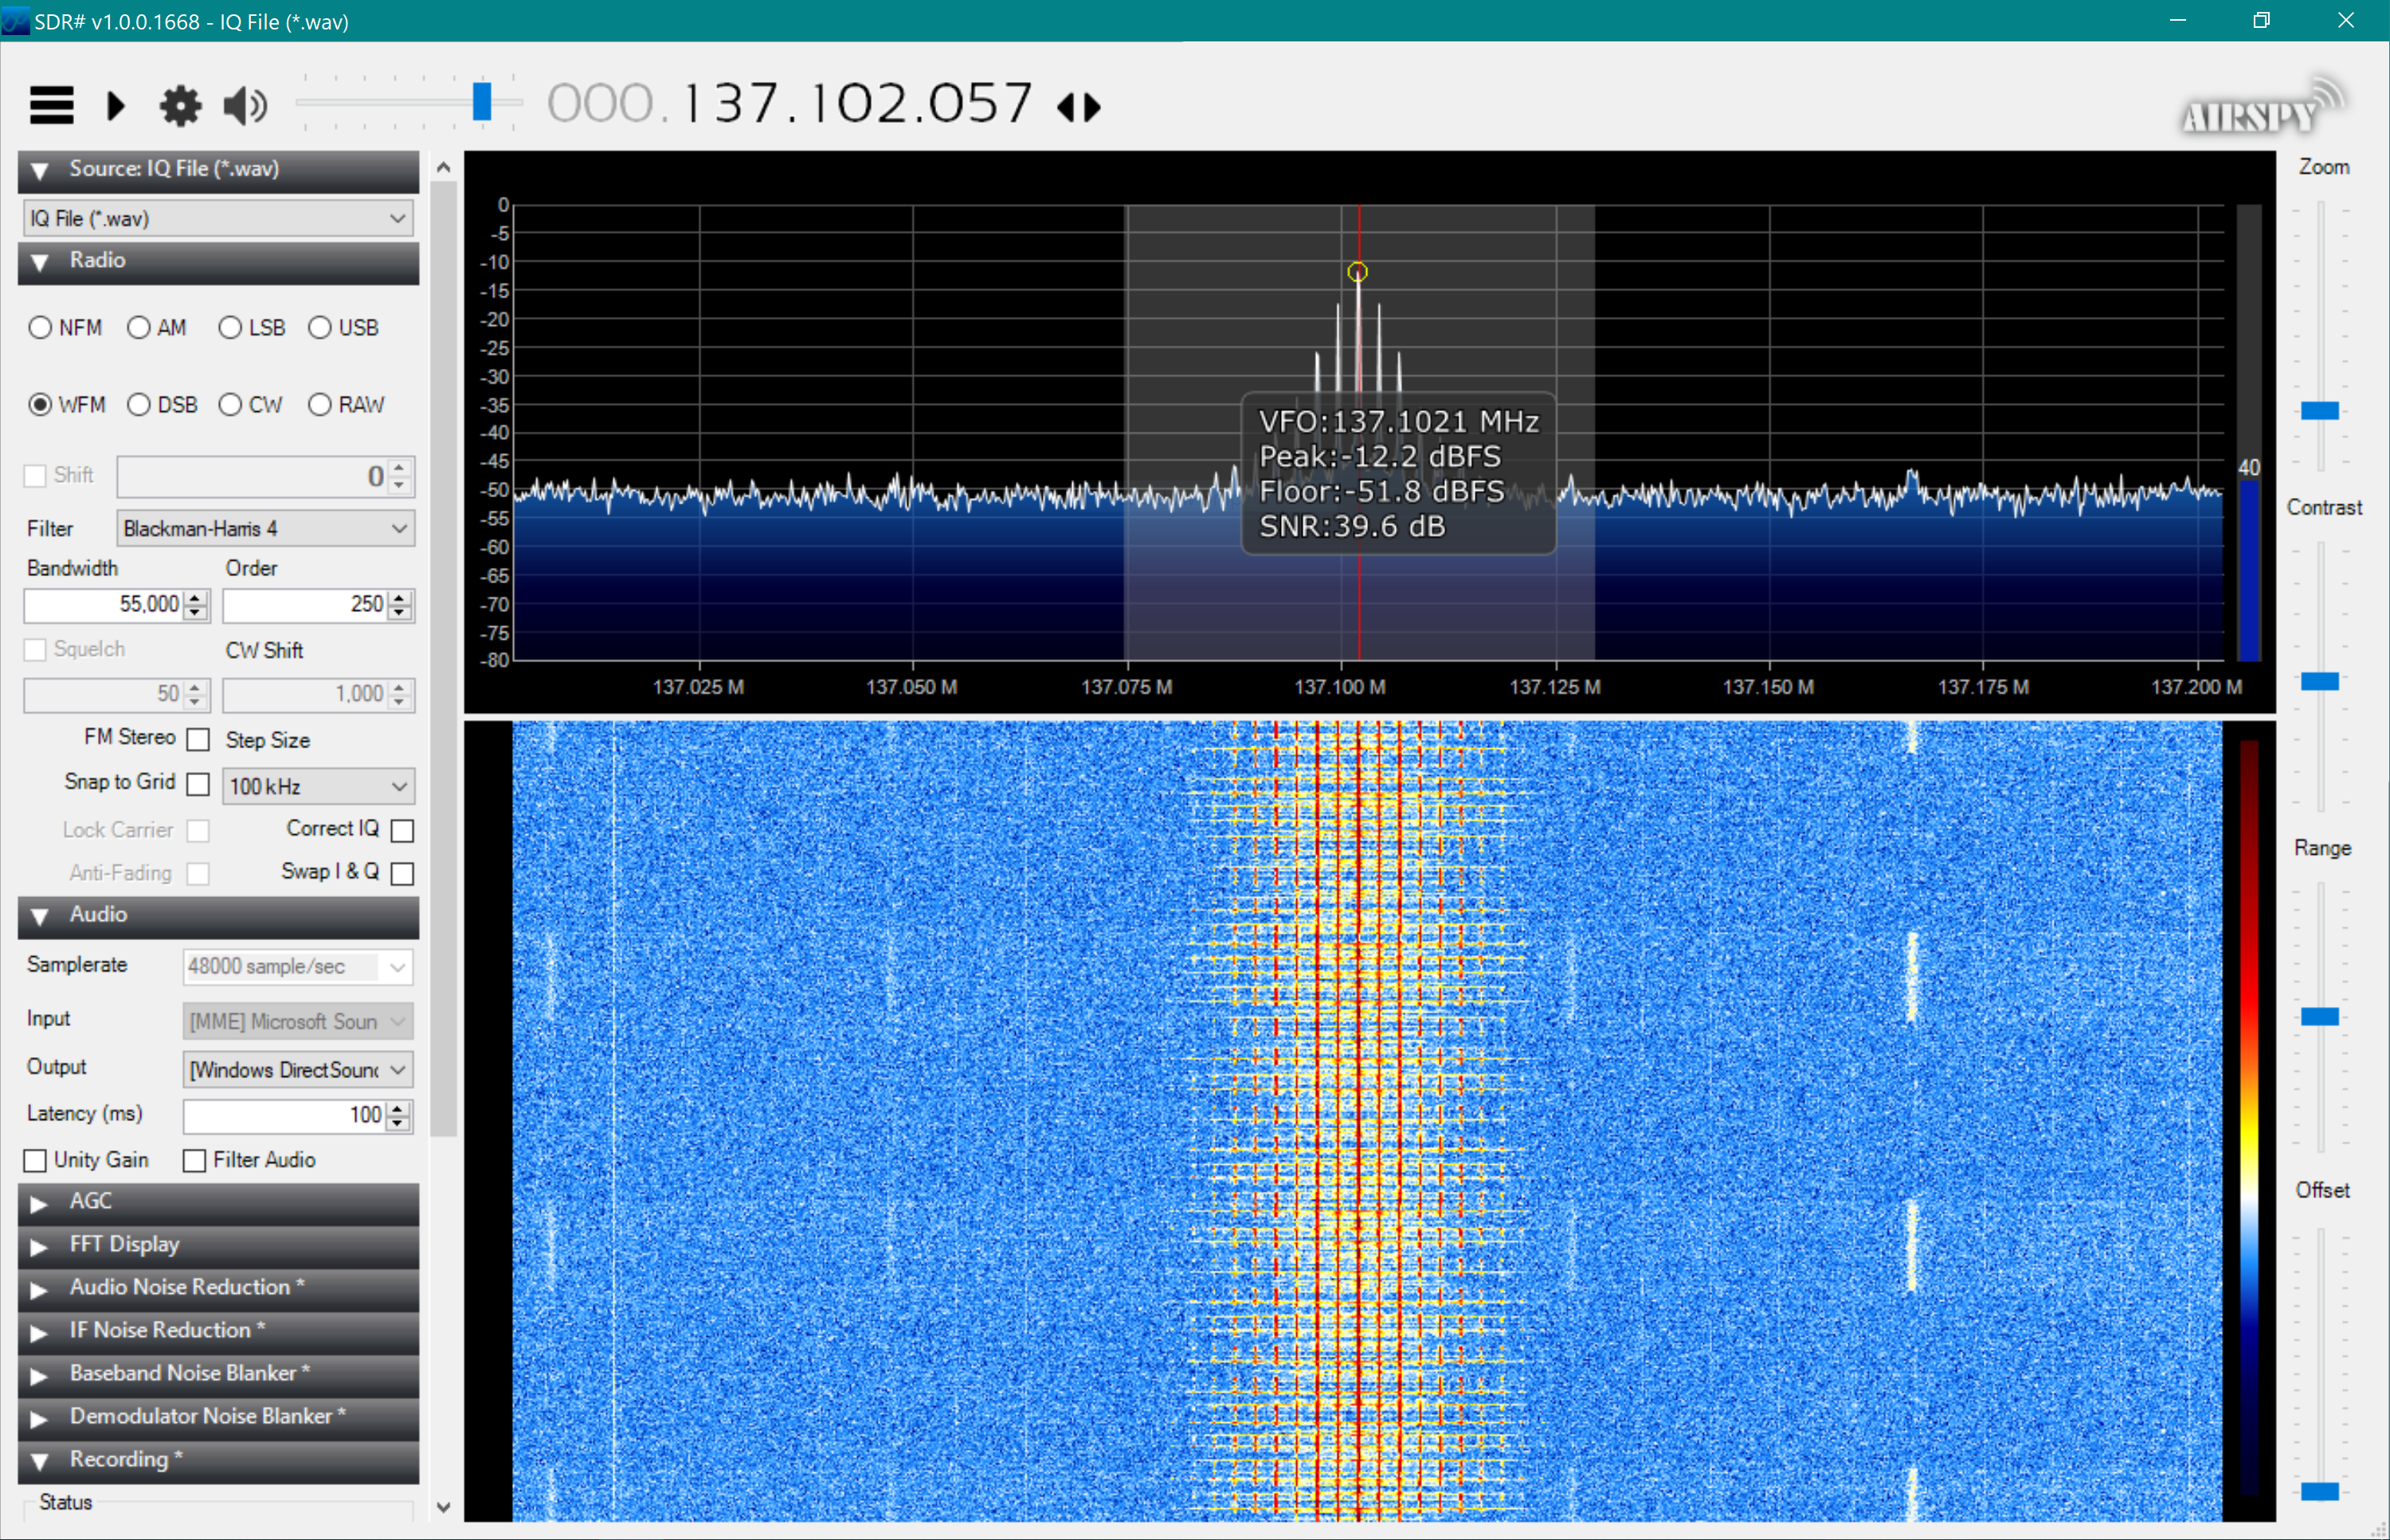 SDR sharp configured and showing download